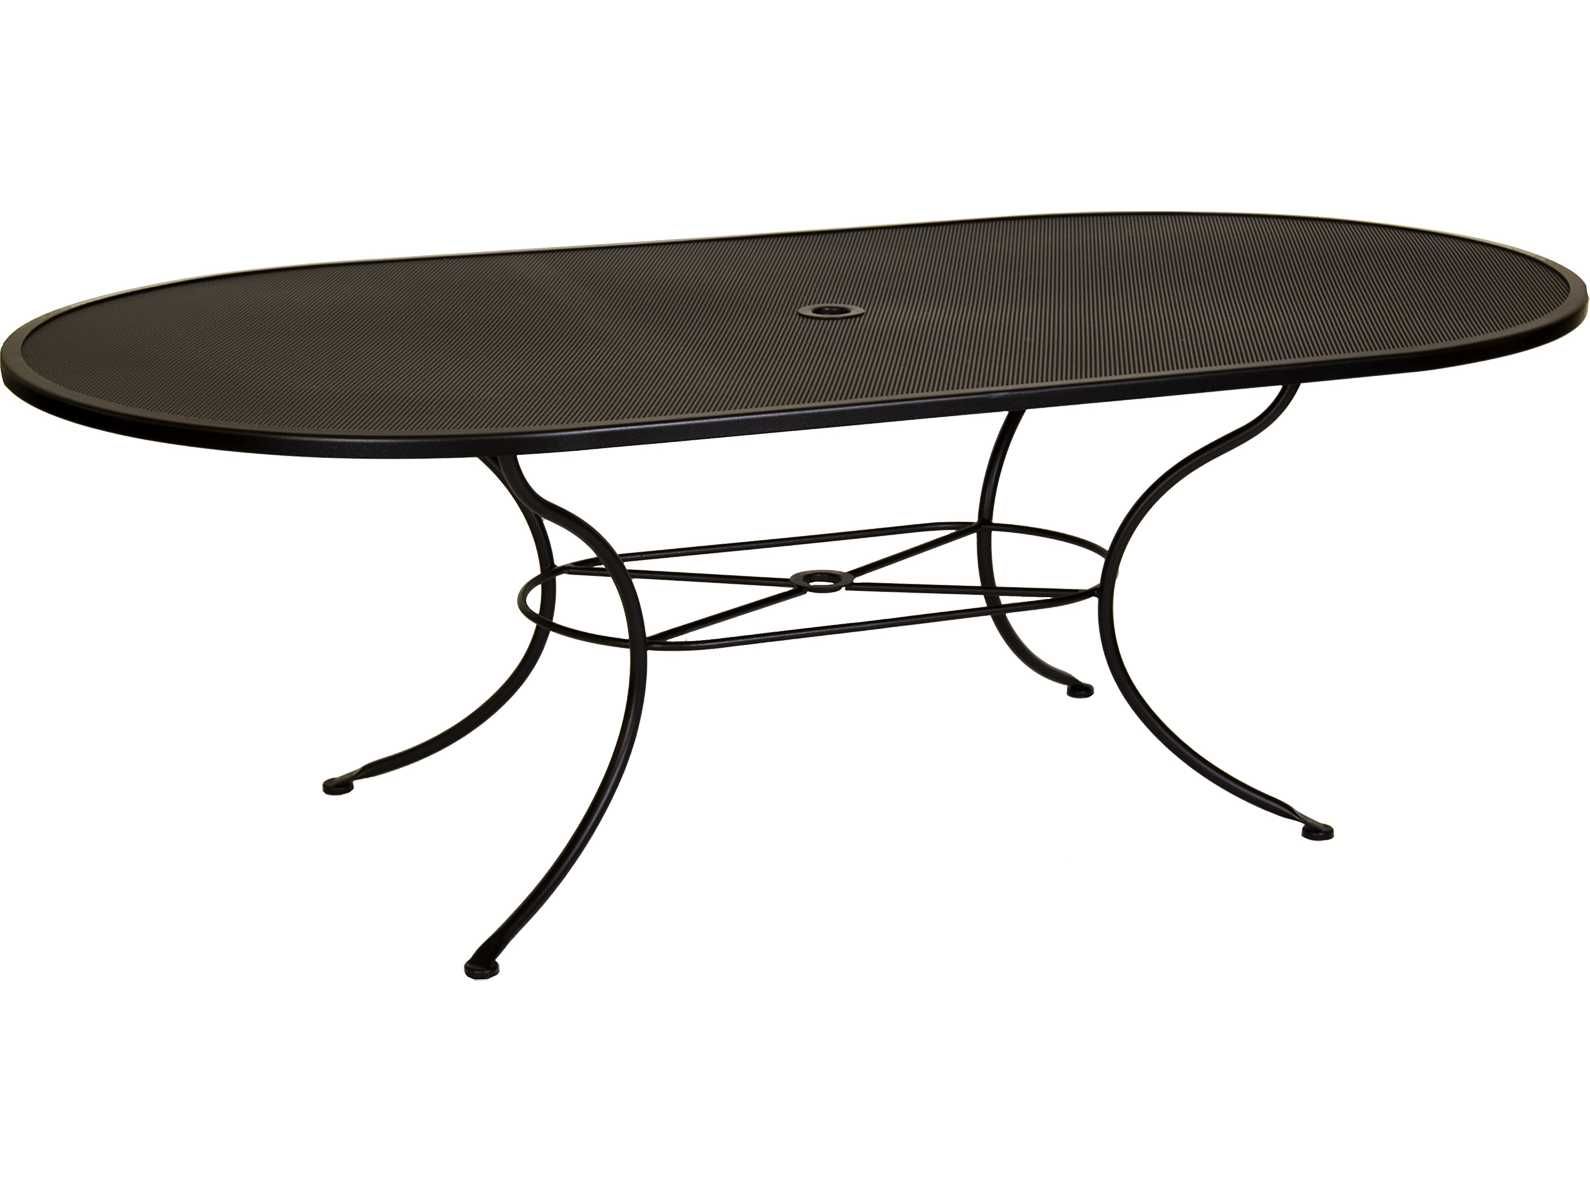 Ow Lee Mesh Wrought Iron 84 X 44 Oval Dining Table With With Regard To Oval Aged Black Iron Console Tables (View 19 of 20)